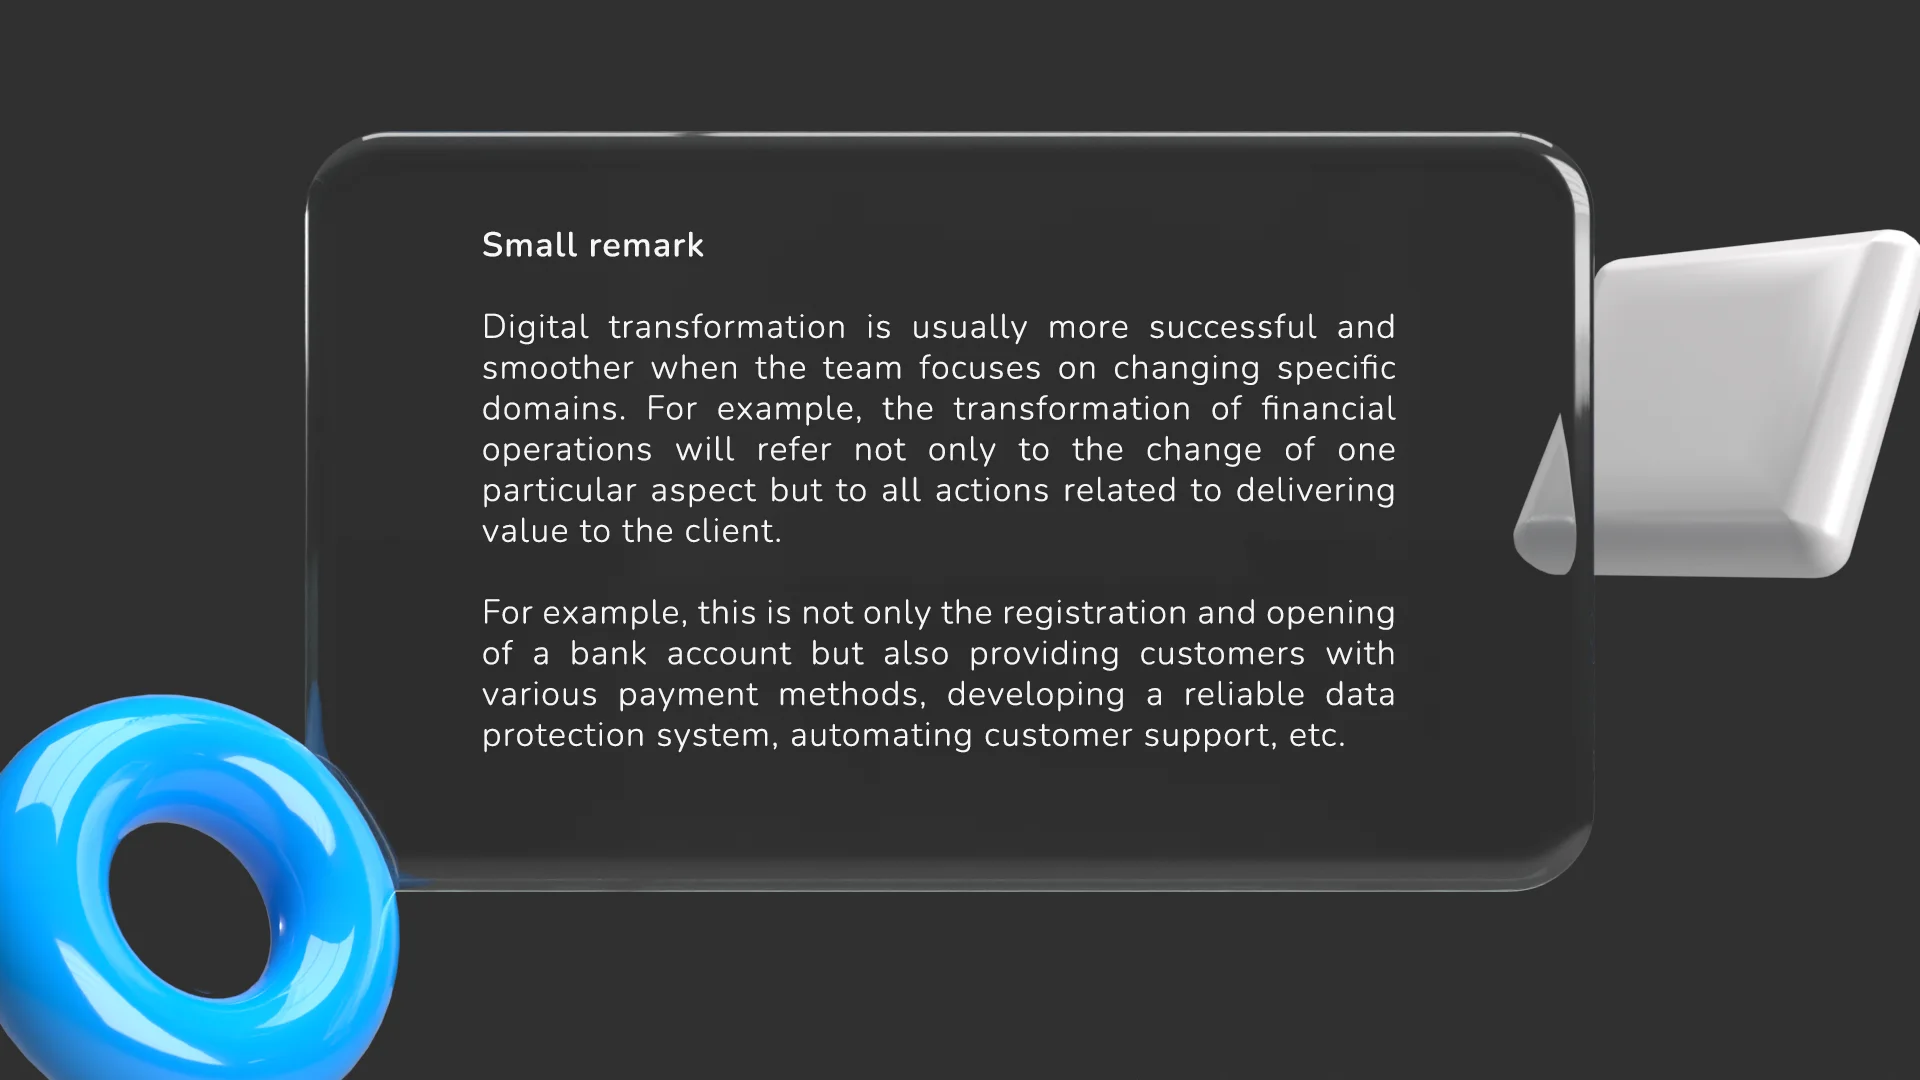 In most cases, digital transformation is more successful and smooth when the team focuses on changing specific domains. For example, the transformation of financial operations will refer not only to the change of a specific aspect but to all actions related to delivering value to the client. For example, this is not only the registration and opening of a bank account but also providing customers with various payment methods, developing a reliable data protection system, automating customer support, etc. 